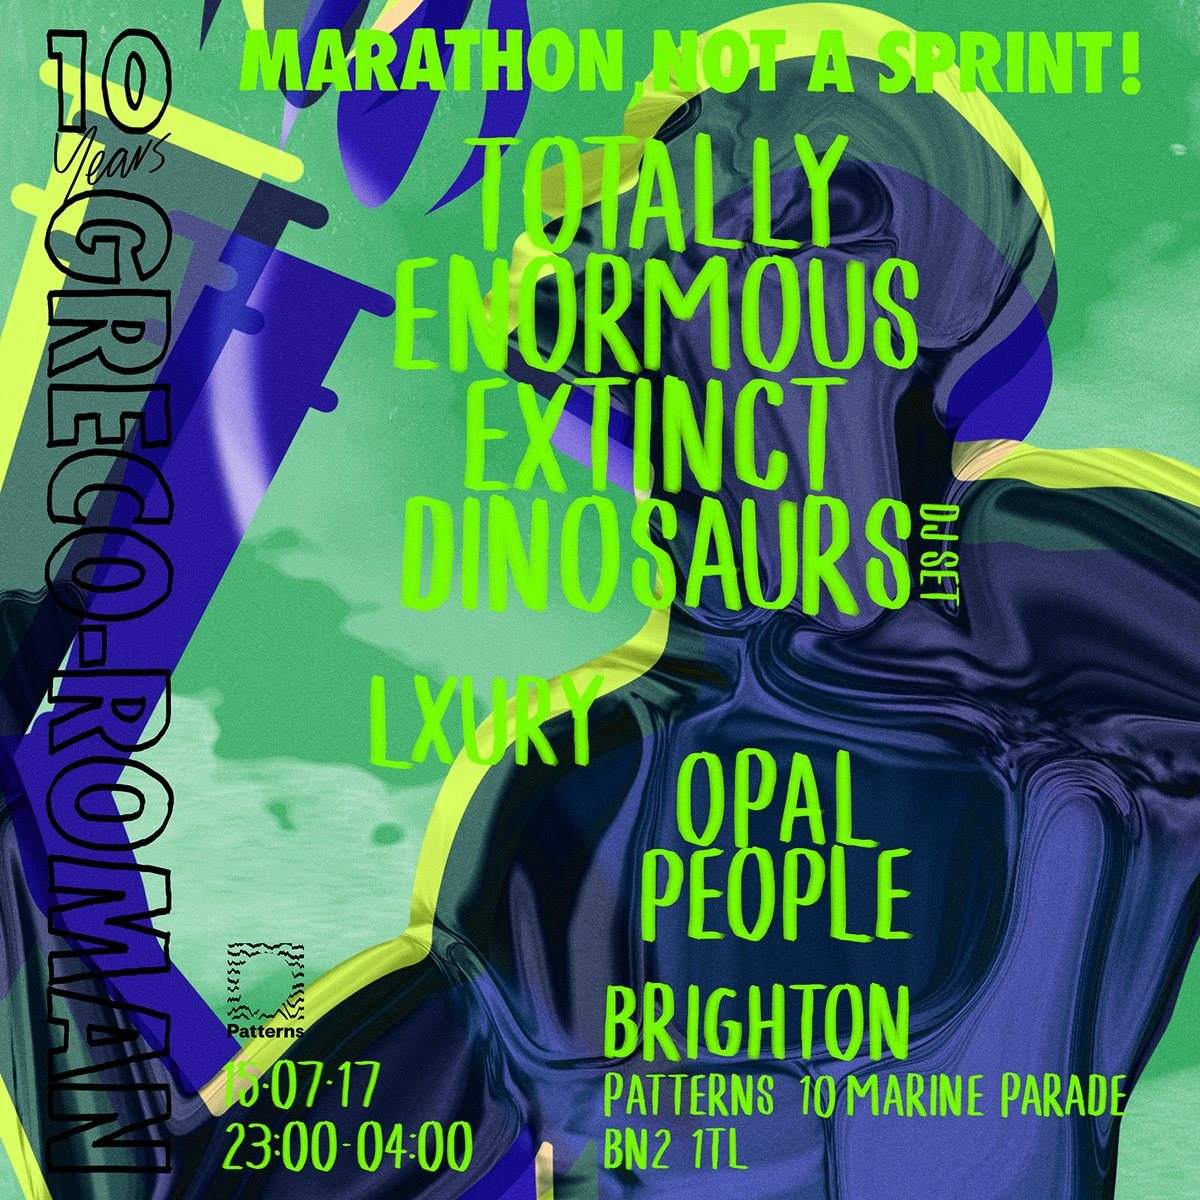 Totally Enormous Extinct Dinosaurs, Lxury & Opal People - Página frontal